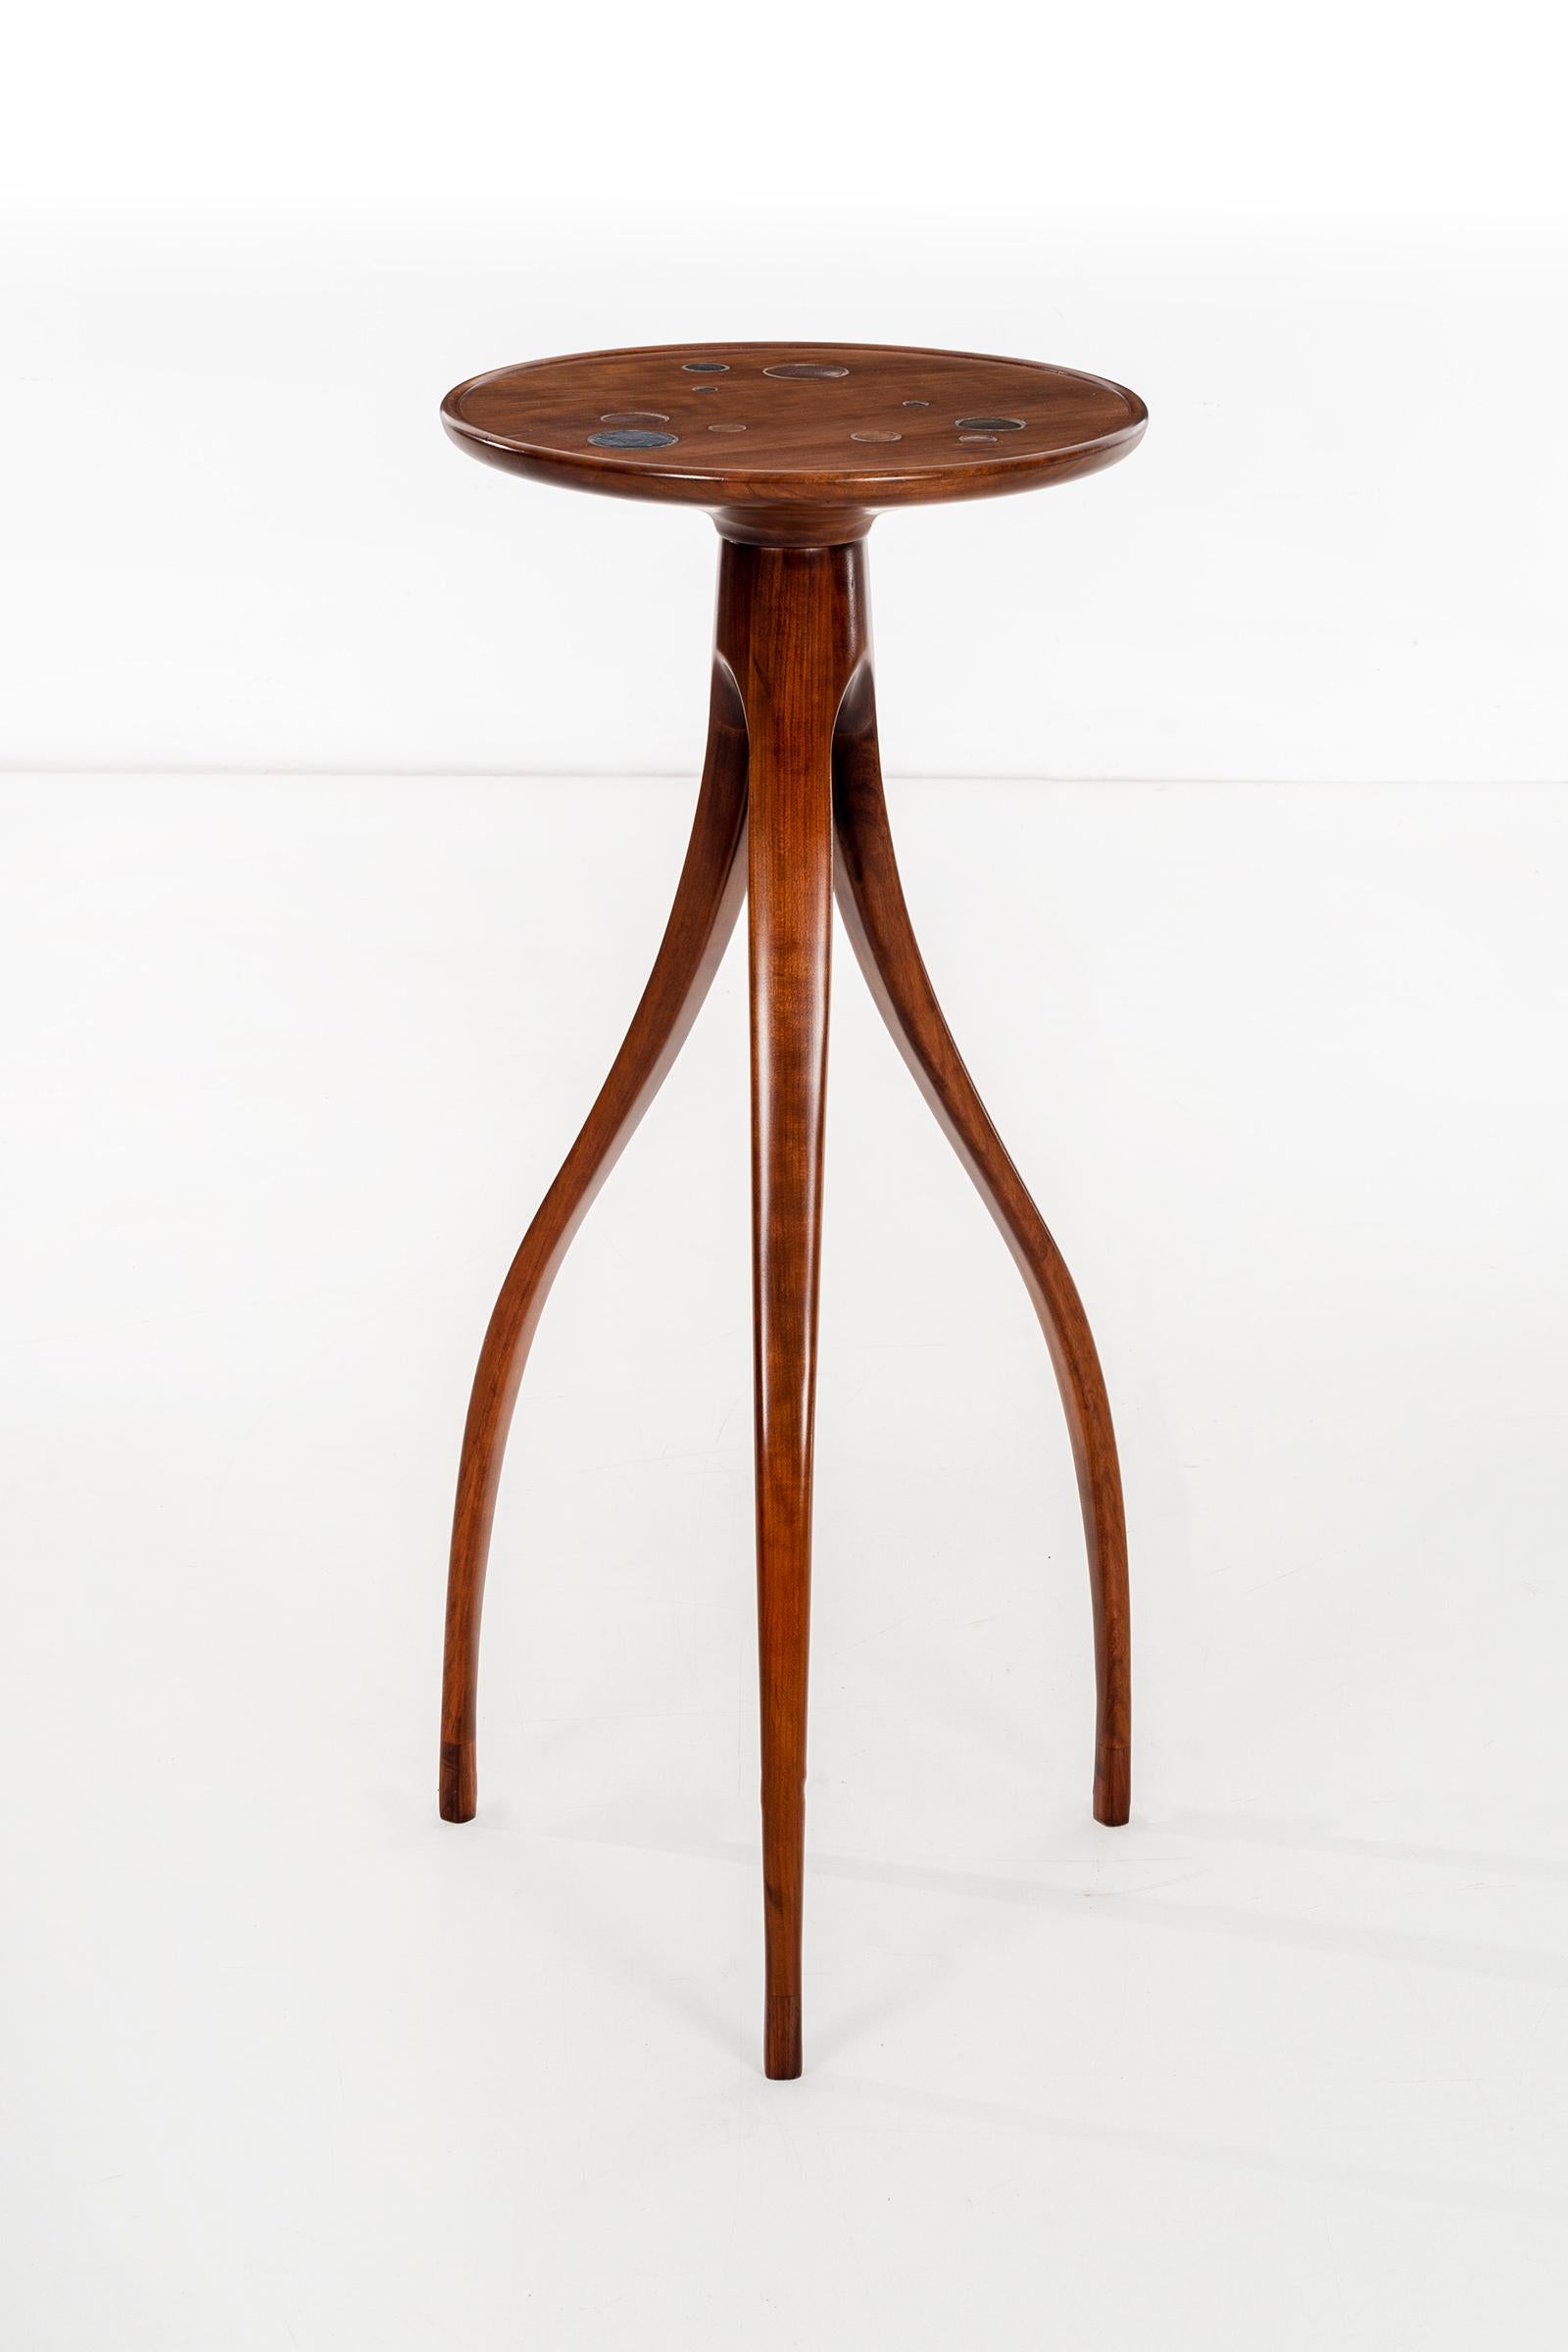 Slender scale pedestal high tripod table, solid carved walnut lip edge top with ceramic design details inset.
Feet have lighter tone wood accent.